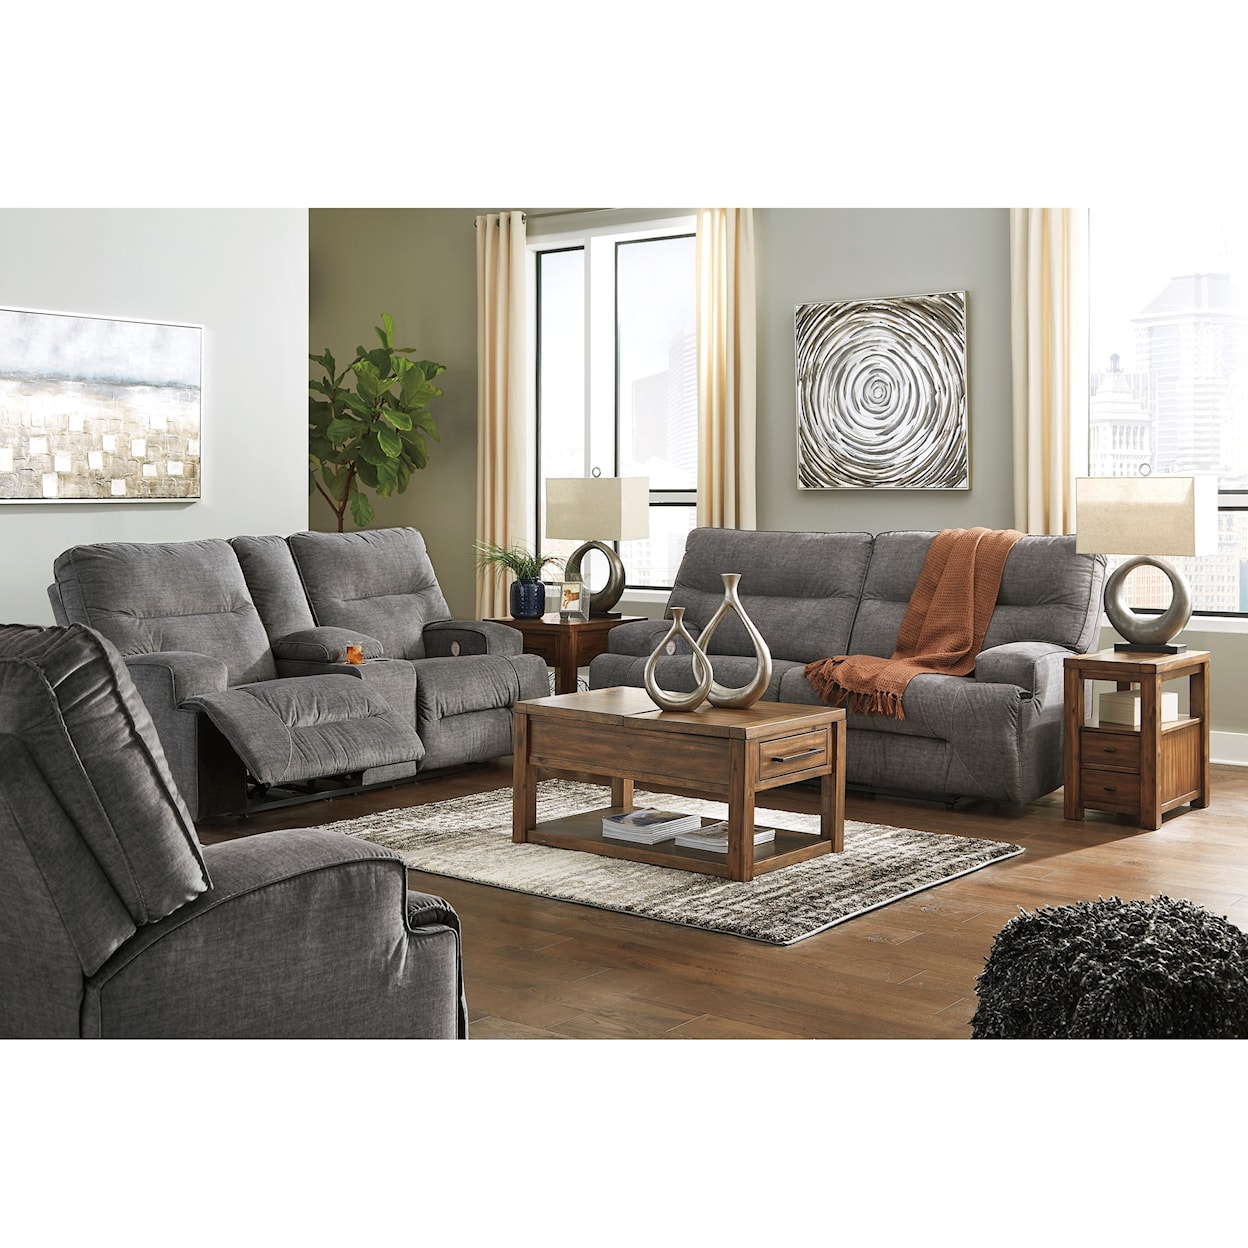 Ashley Furniture Benchcraft Coombs Power Reclining Living Room Group